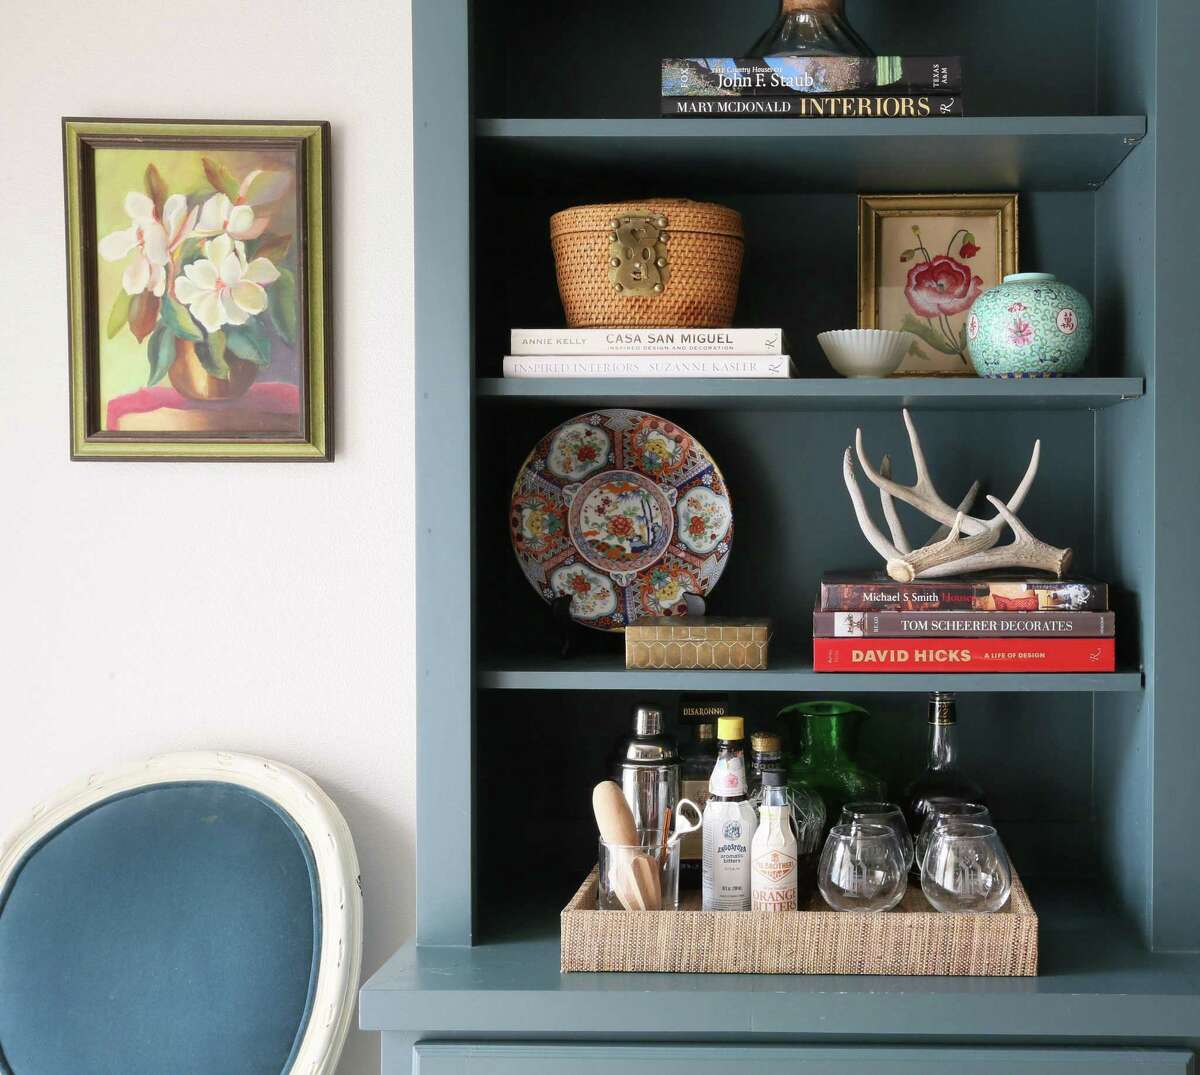 Porcelain with Asian motifs adds a touch of chinoiserie to these shelves. Design by Lindsey Herod Interiors.